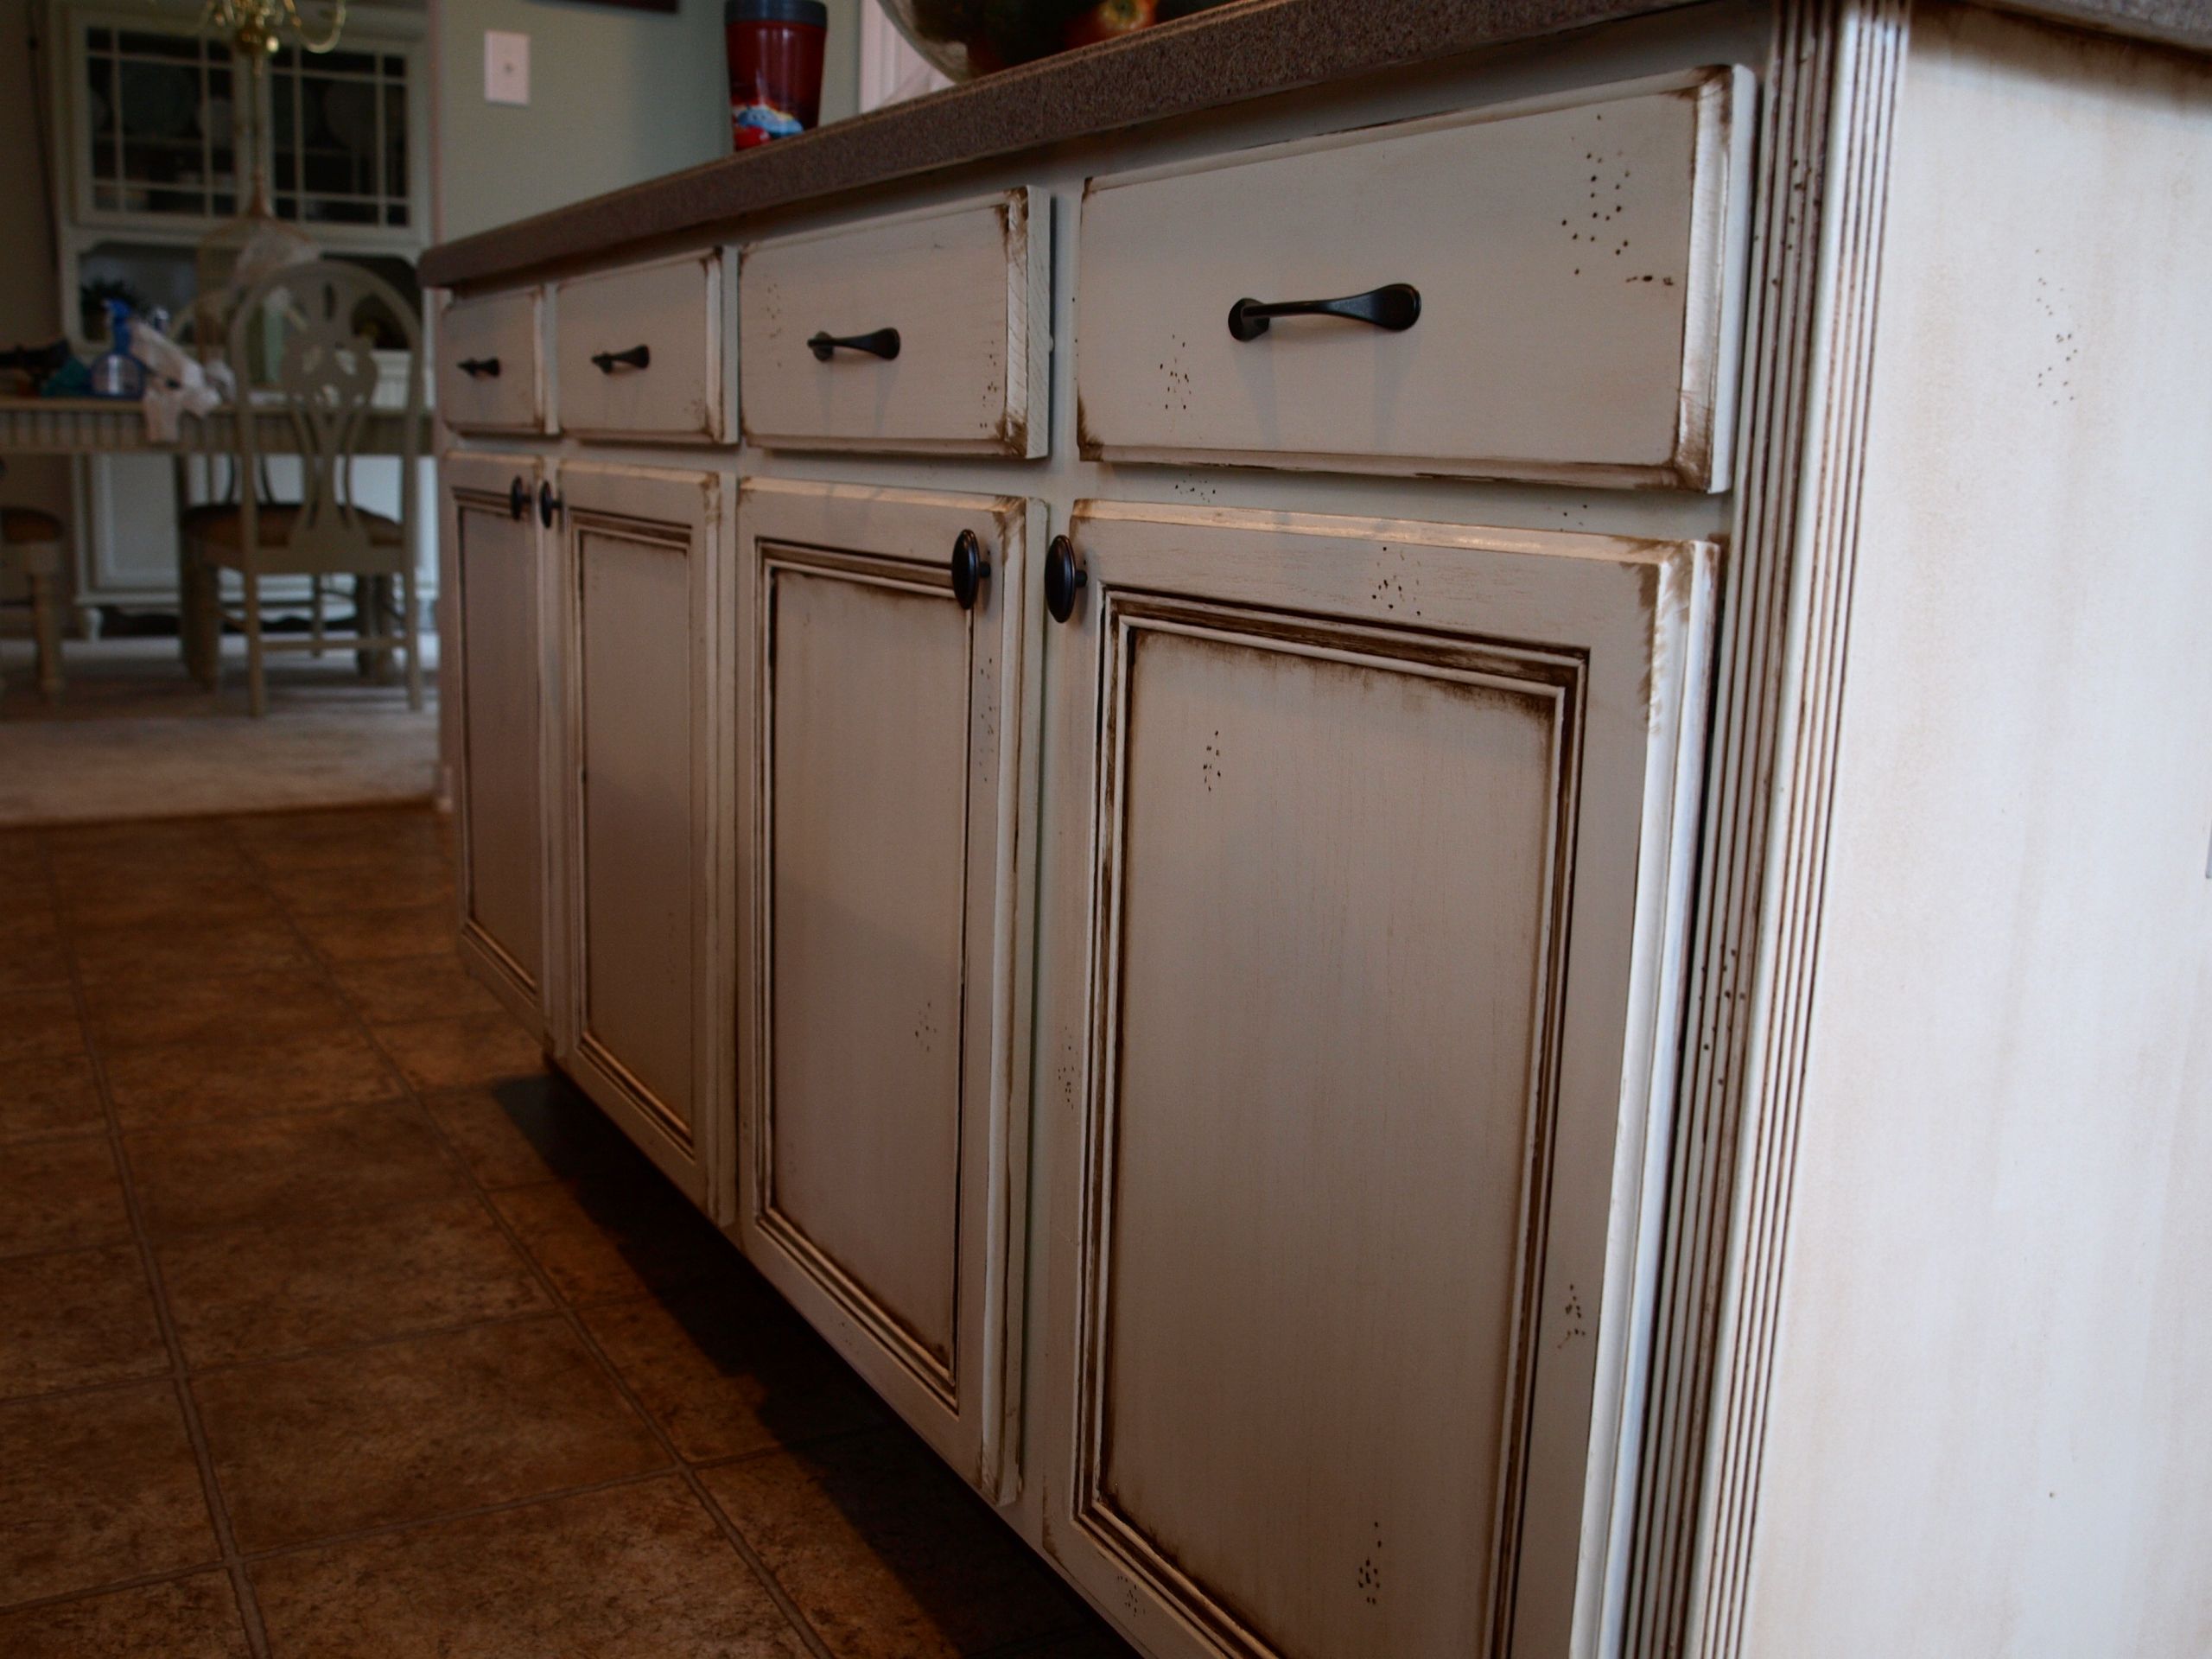 Antiqued Kitchen Cabinets
 How to Paint and Antique Kitchen Cabinets my way